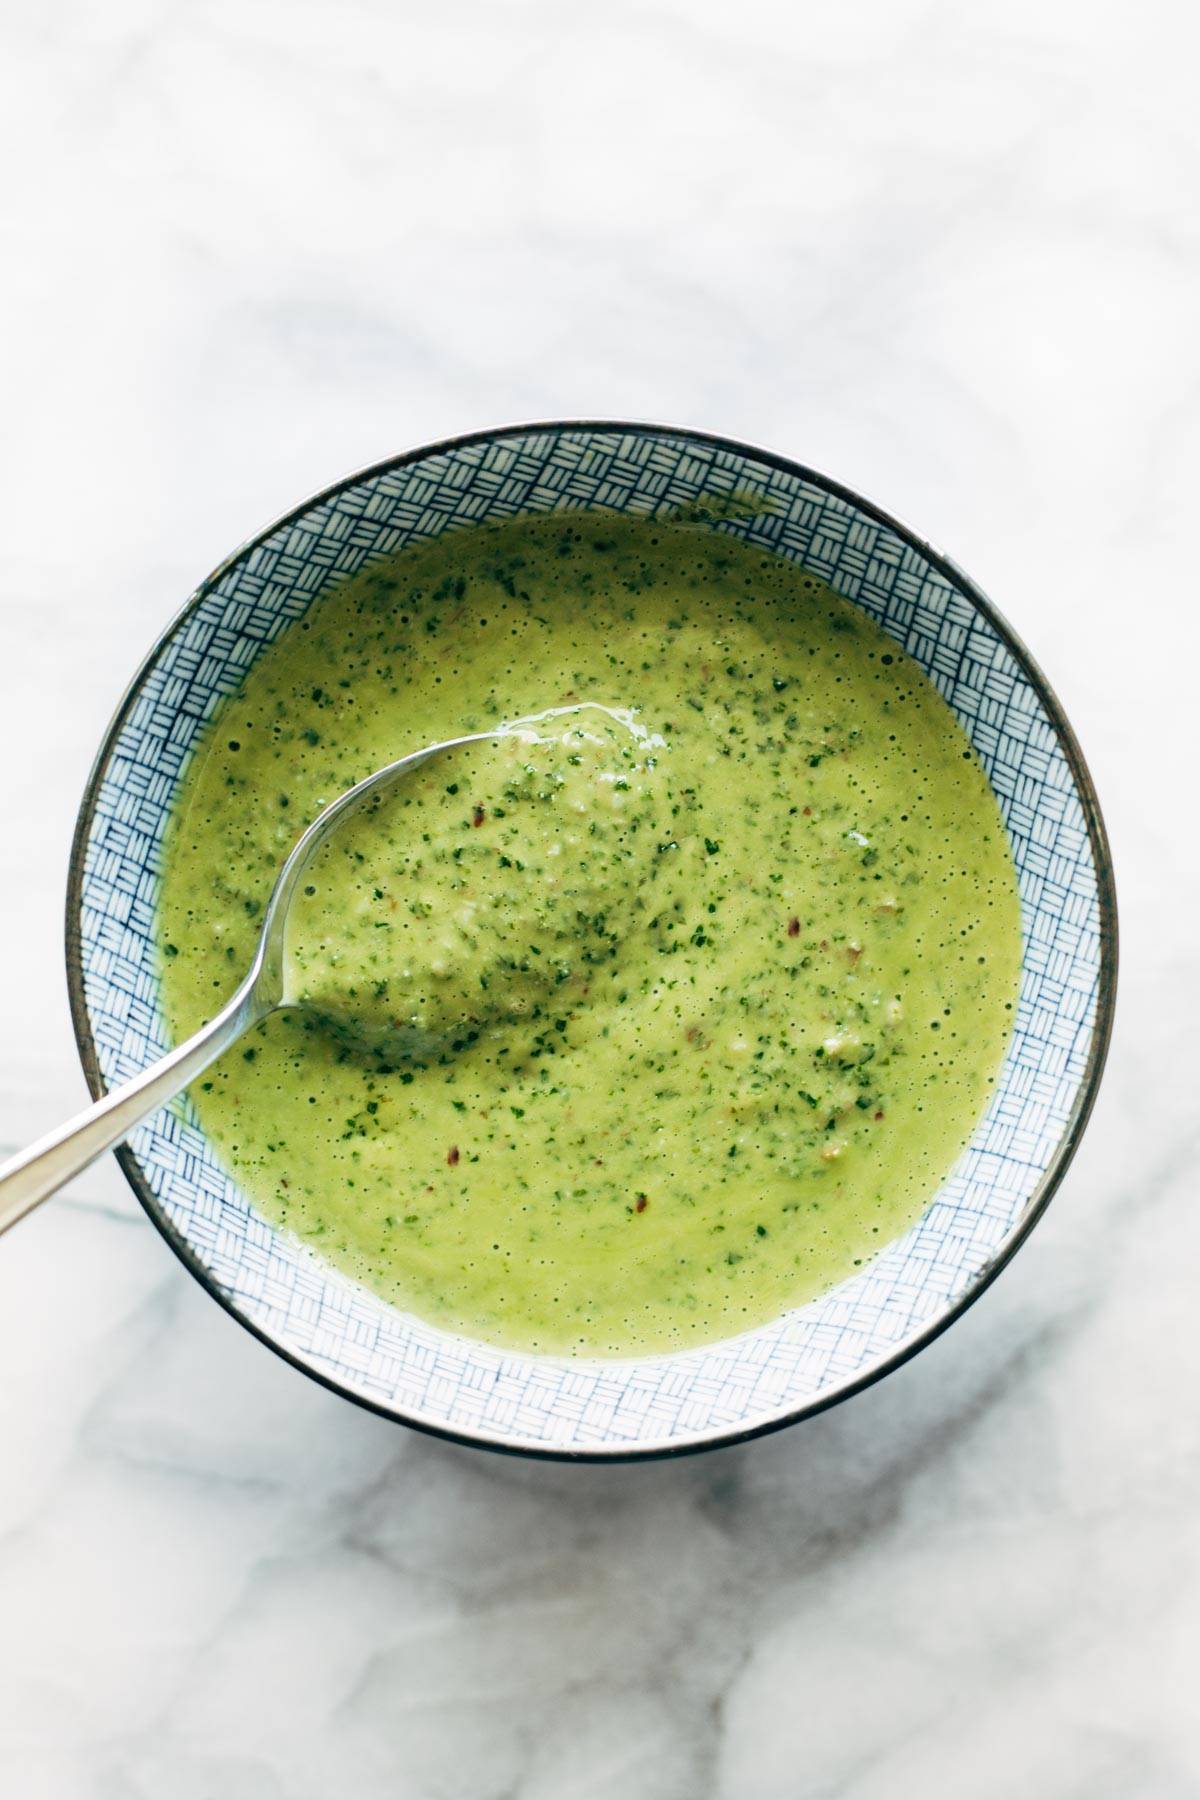 Kale Chimichurri in a bowl with a spoon.